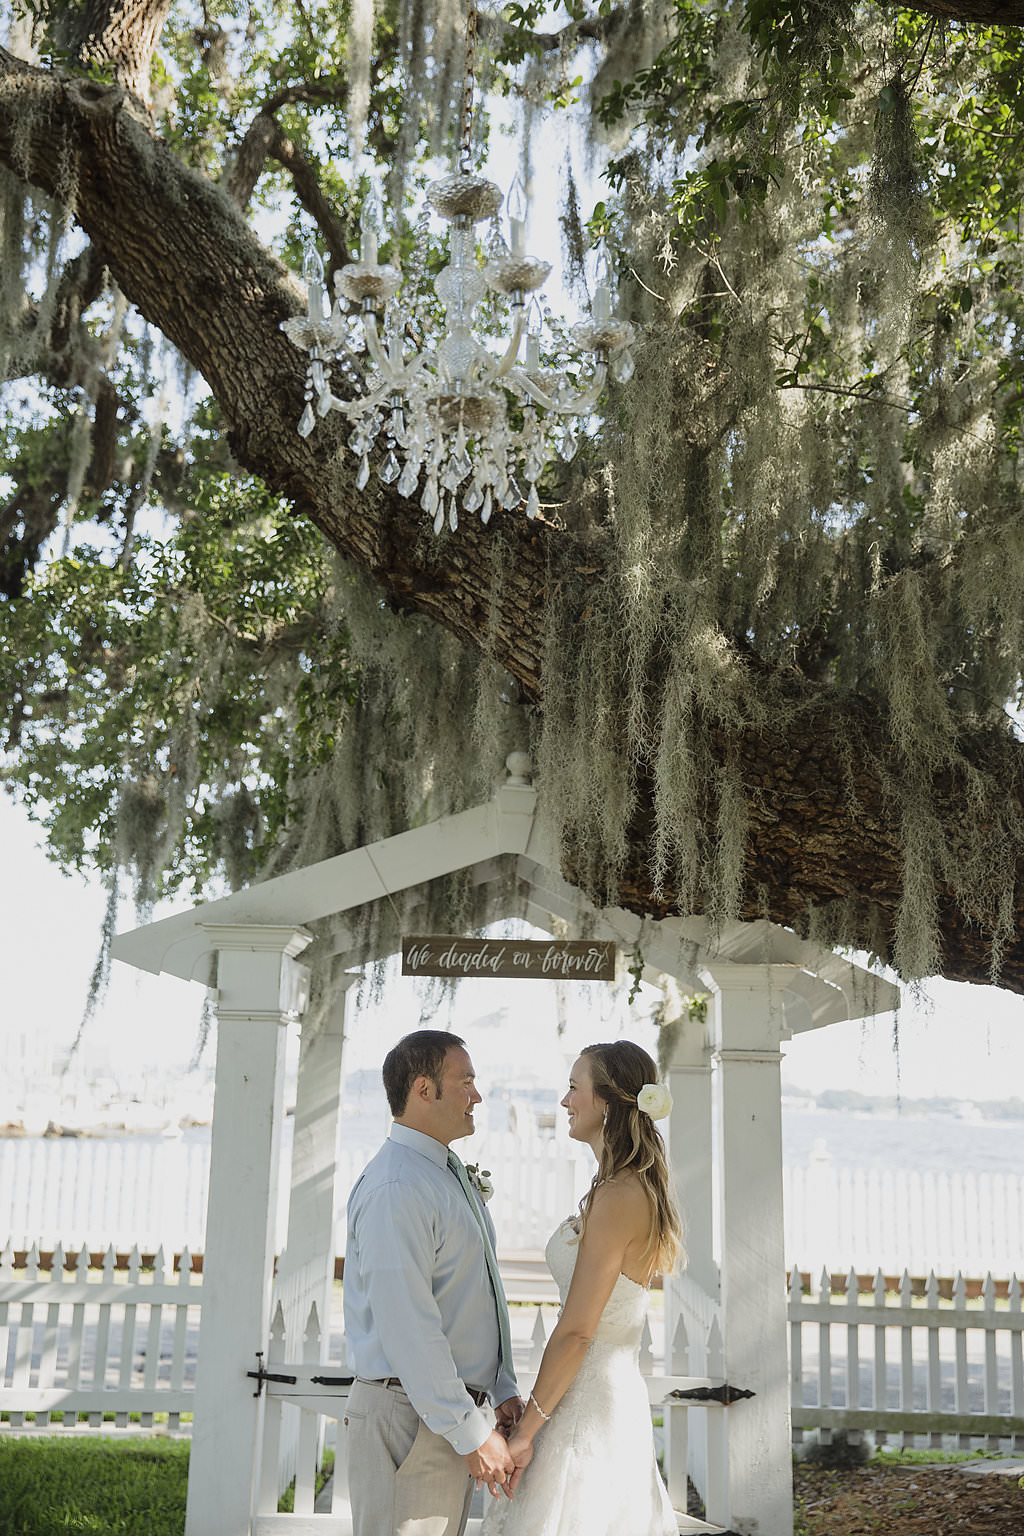 Waterfront Sarasota Wedding Ceremony Bride and Groom Portrait, Groom in Light Blue Shirt, and Vintage Chandelier in Spanish Moss Covered Oak Tree